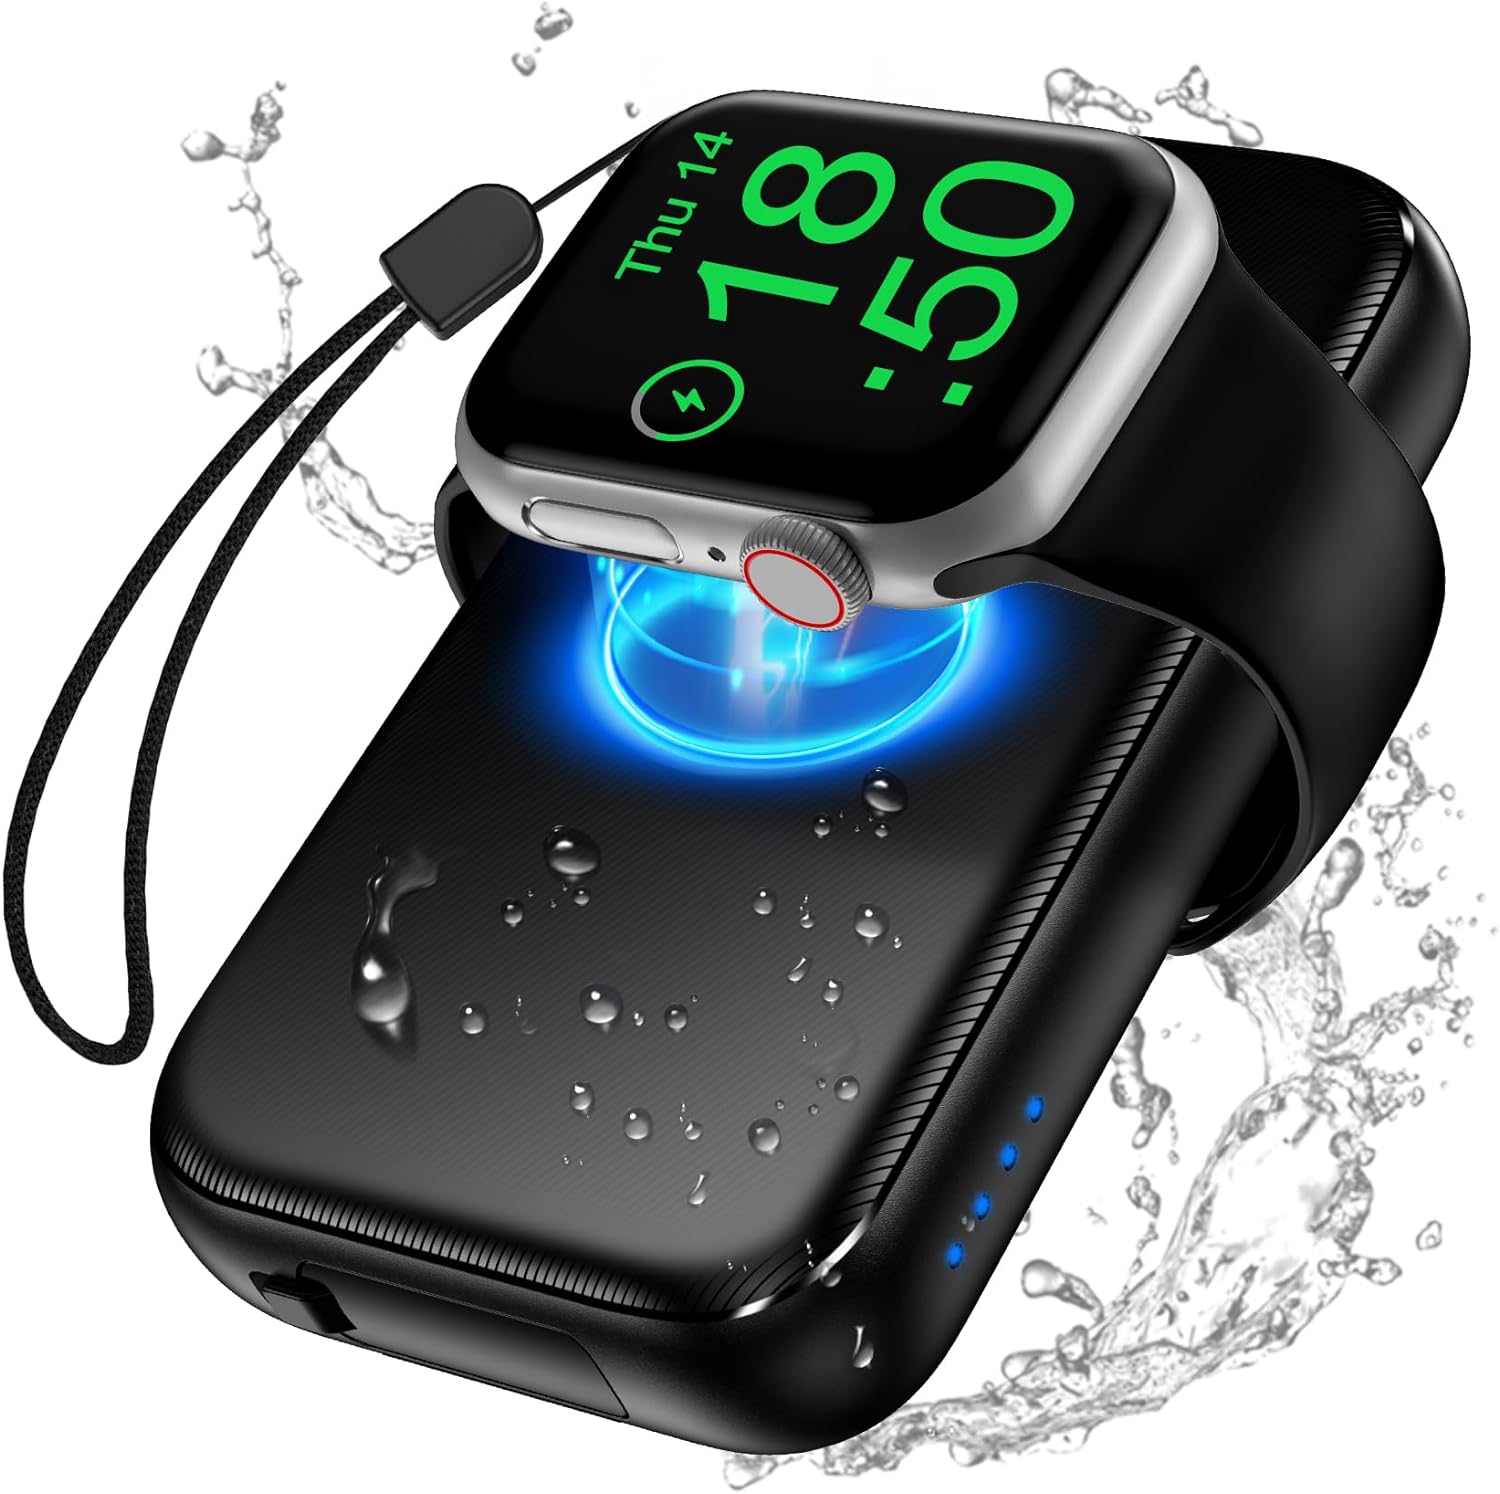 𝟮𝟬𝟮𝟯 𝐔𝐩𝐠𝐫𝐚𝐝𝐞𝐝 Portable Iwatch Charger For Apple Watch Series 8/Uitra/7/6/5/4/3/2/Se/,1500Mah Magnetic Wireless Charger Power Bank [Ipx5 Waterproof] Travel Battery Pack-Black